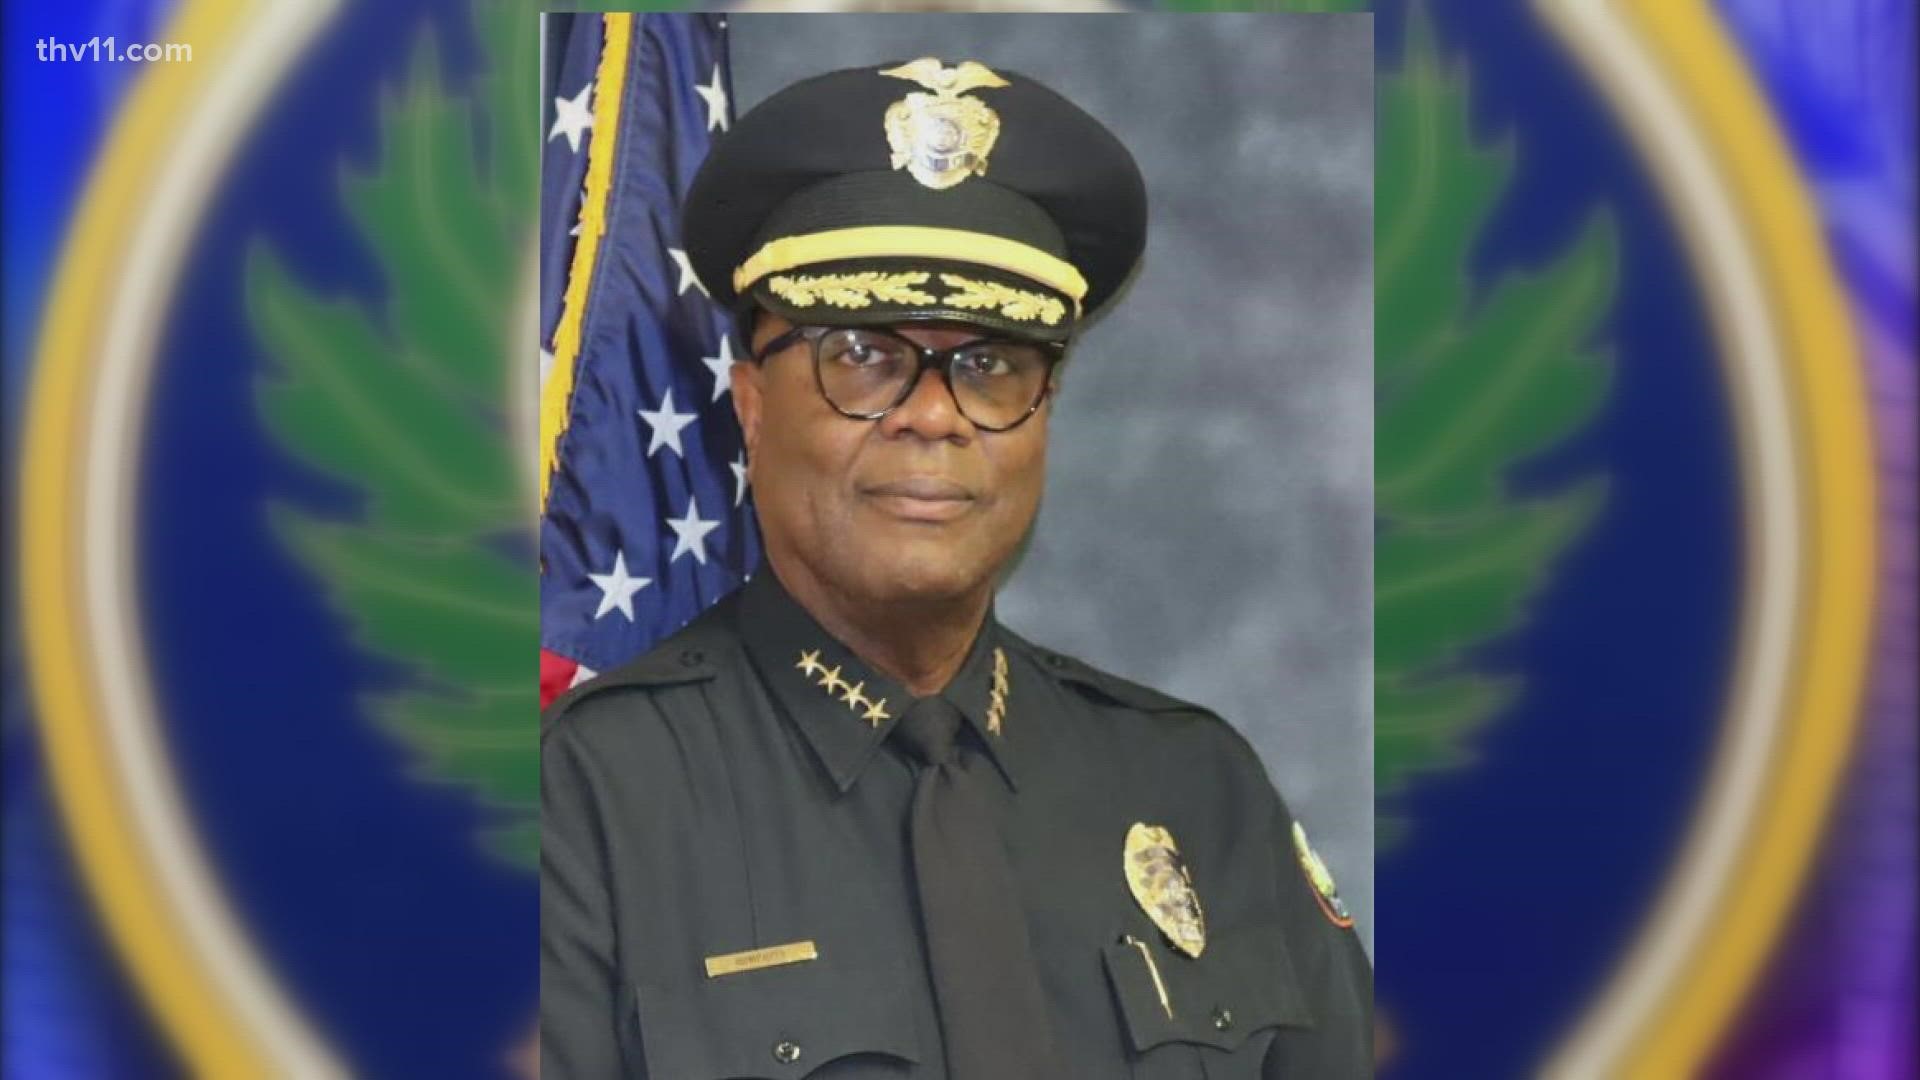 Little Rock Police Chief Keith Humphrey is returning to duty following an incident where there was use of deadly force.